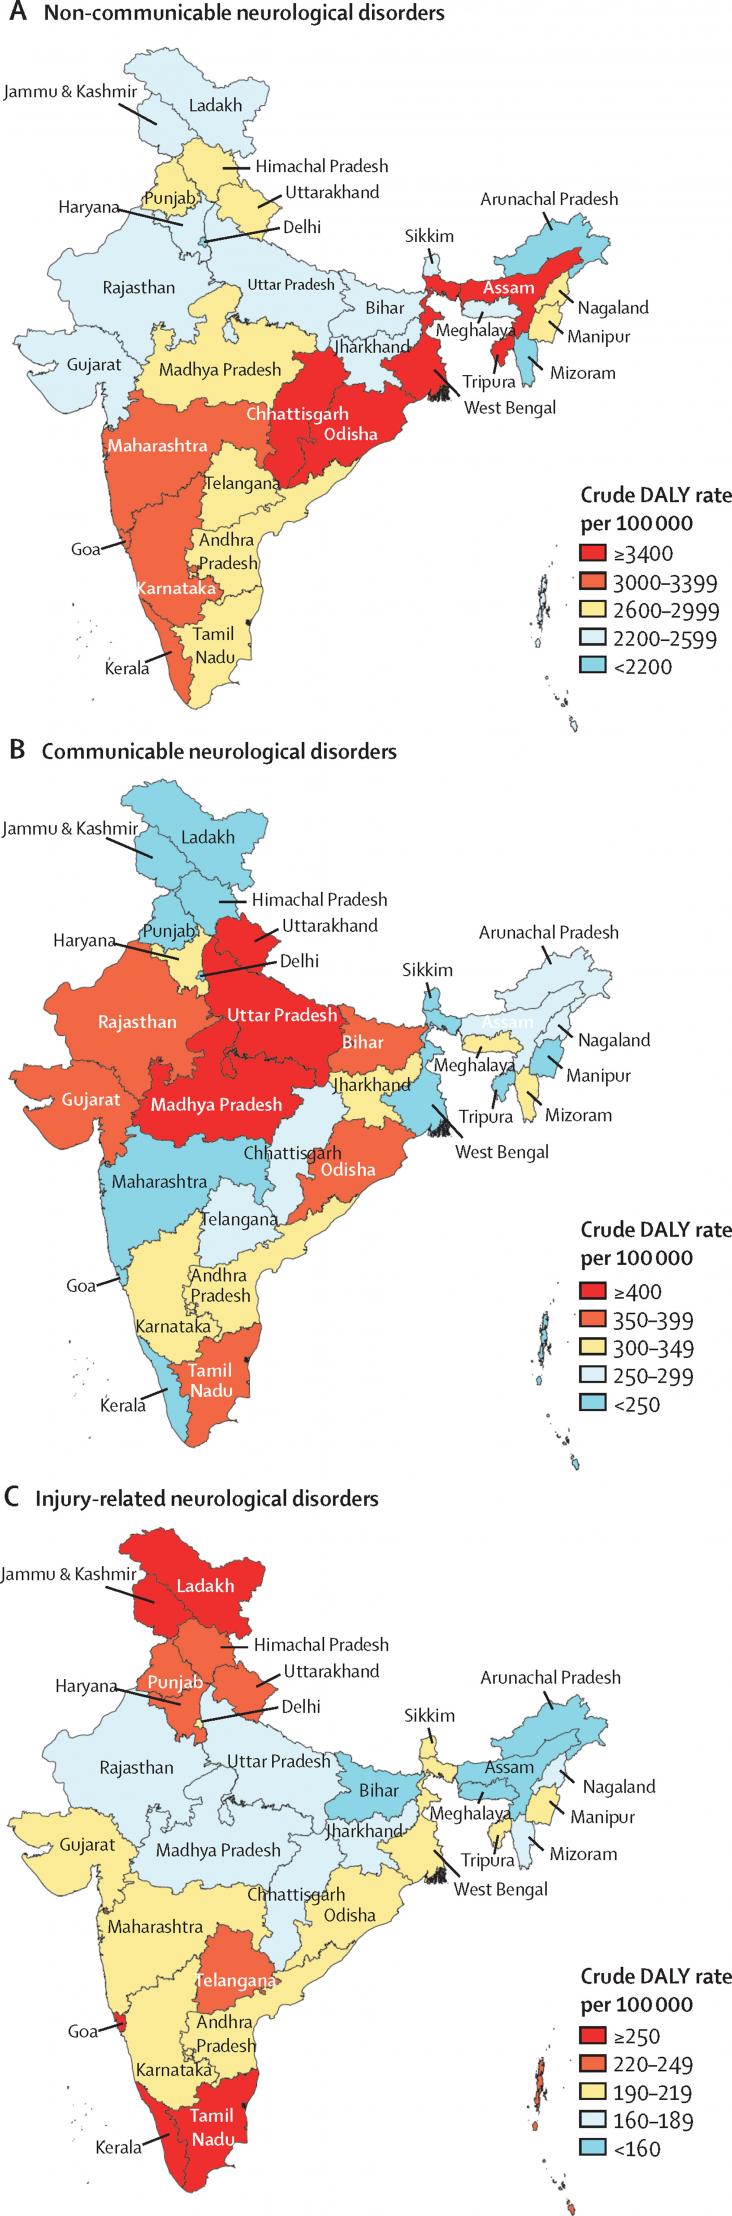 Crude DALY rates of non-communicable, communicable, and injury-related neurological disorders in the states of India, 2019.